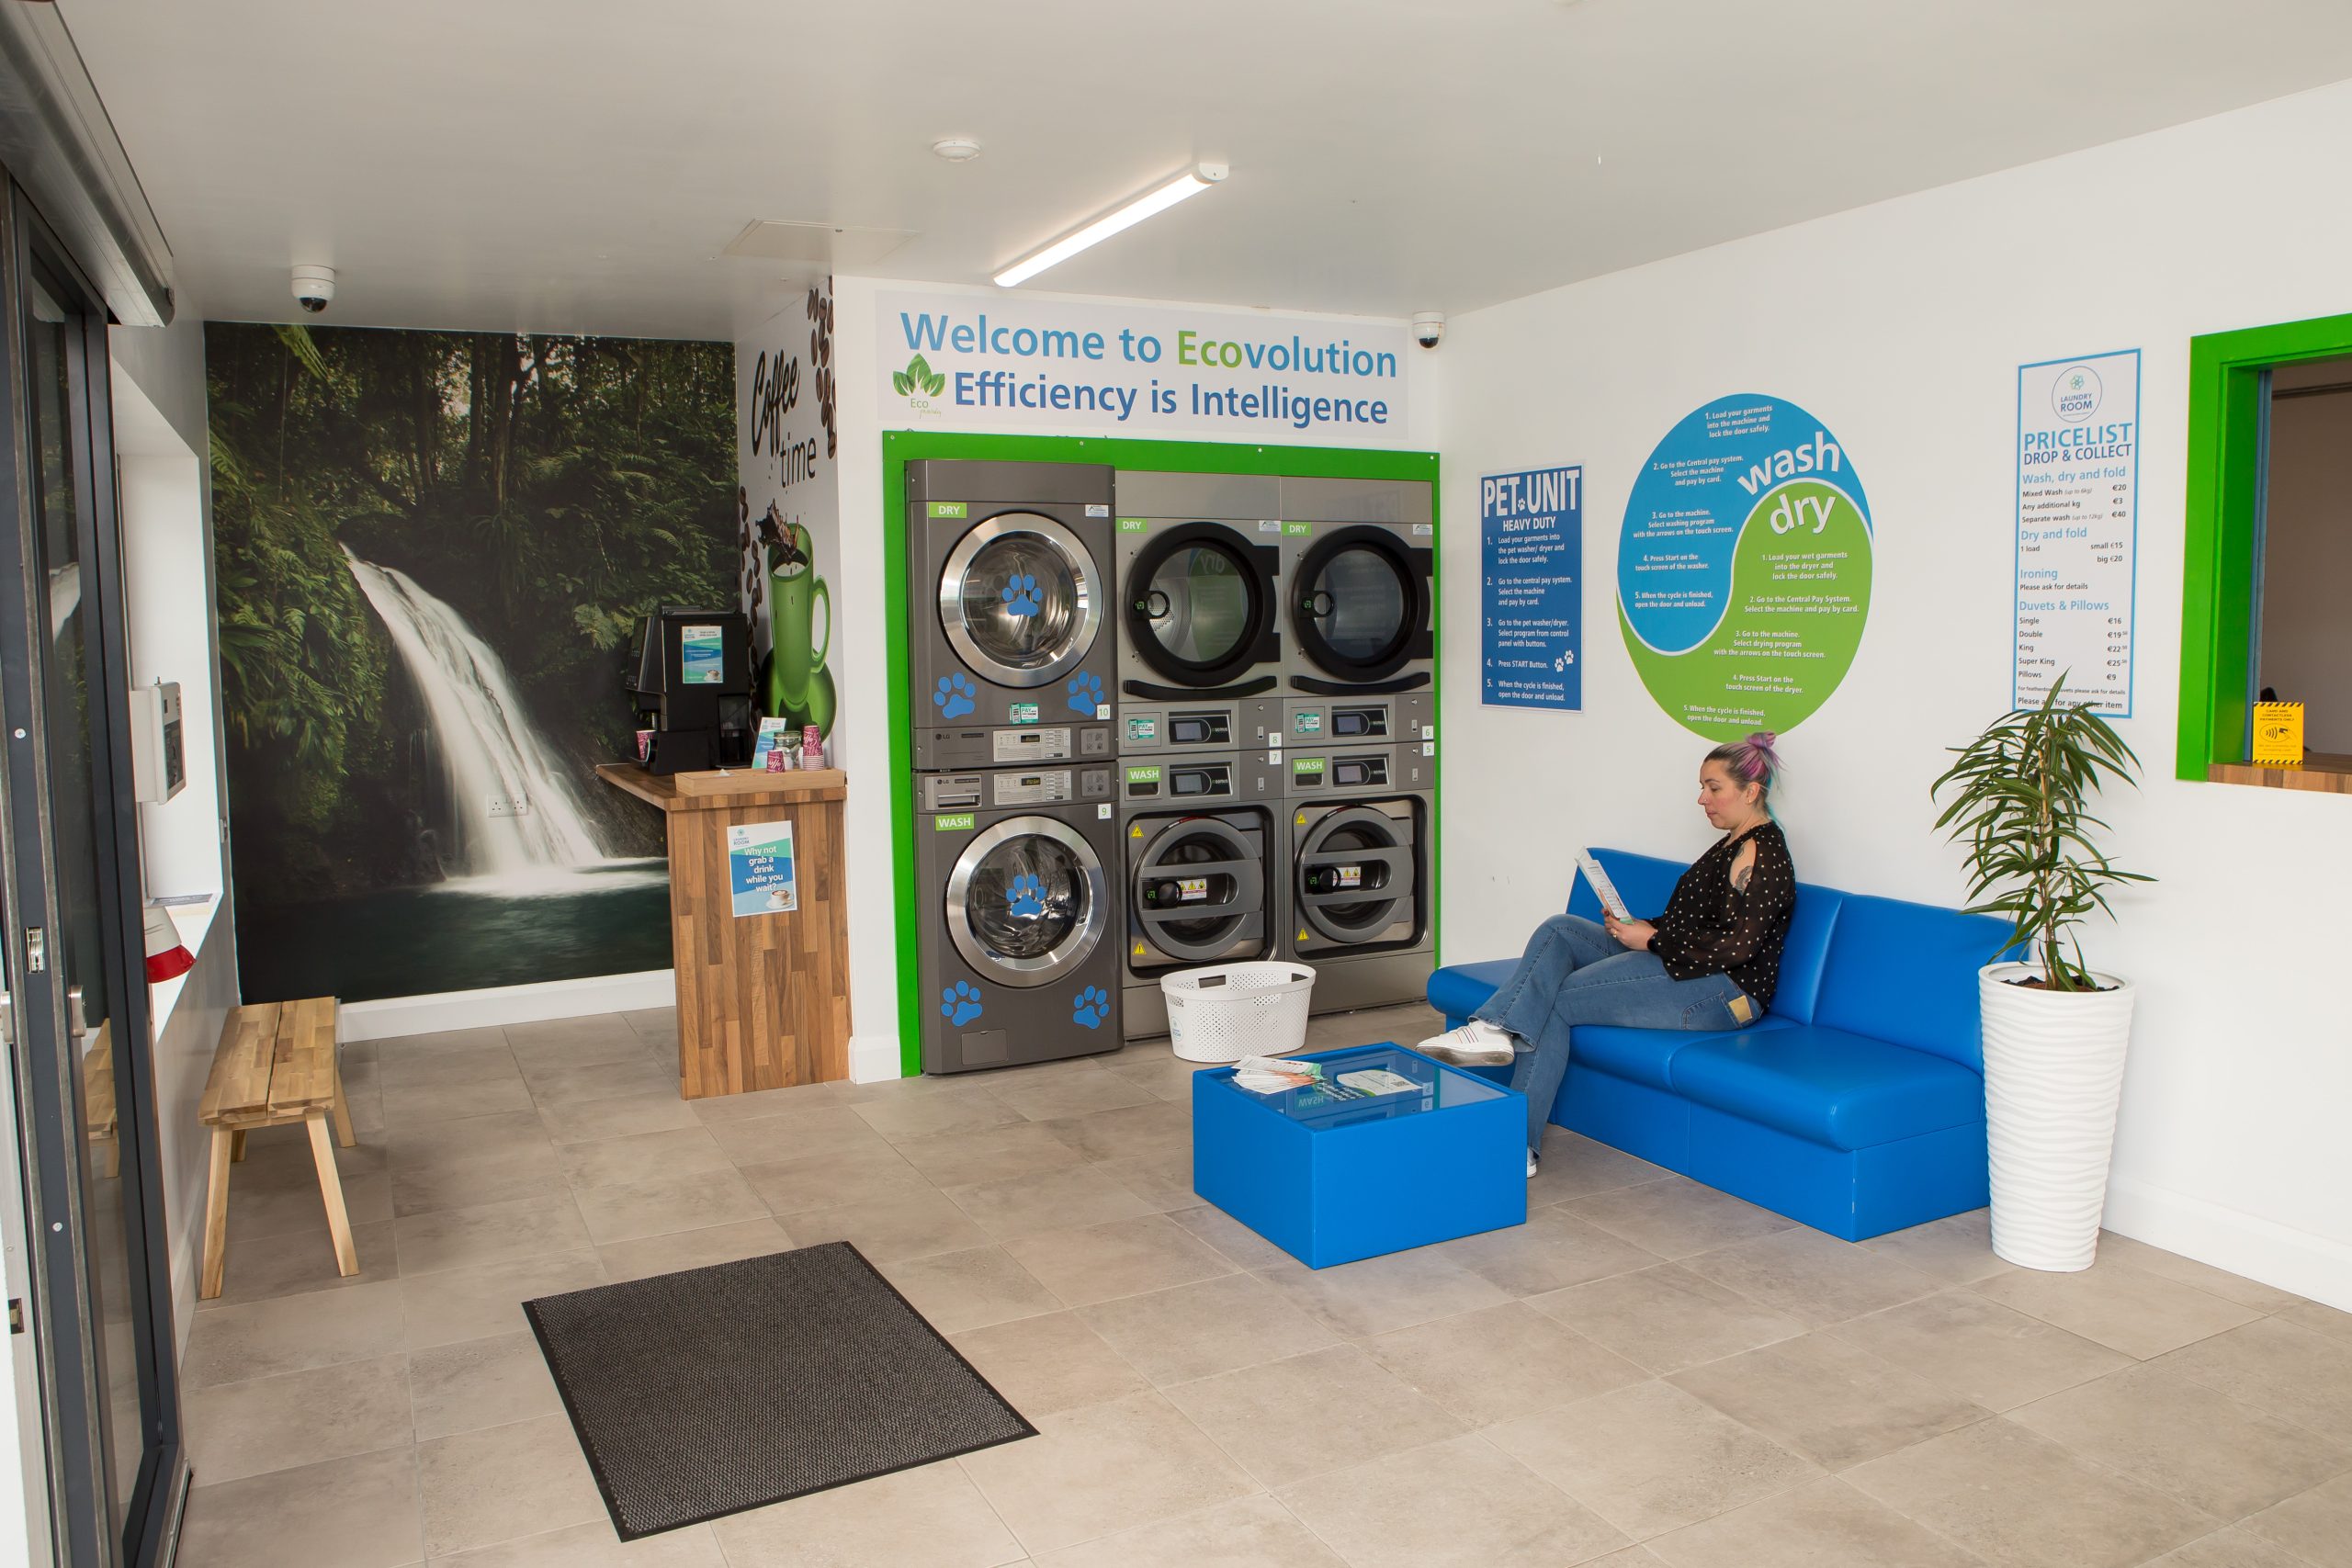 Cleaning Up – With Laundry Room – Laundry Services on the Forecourt